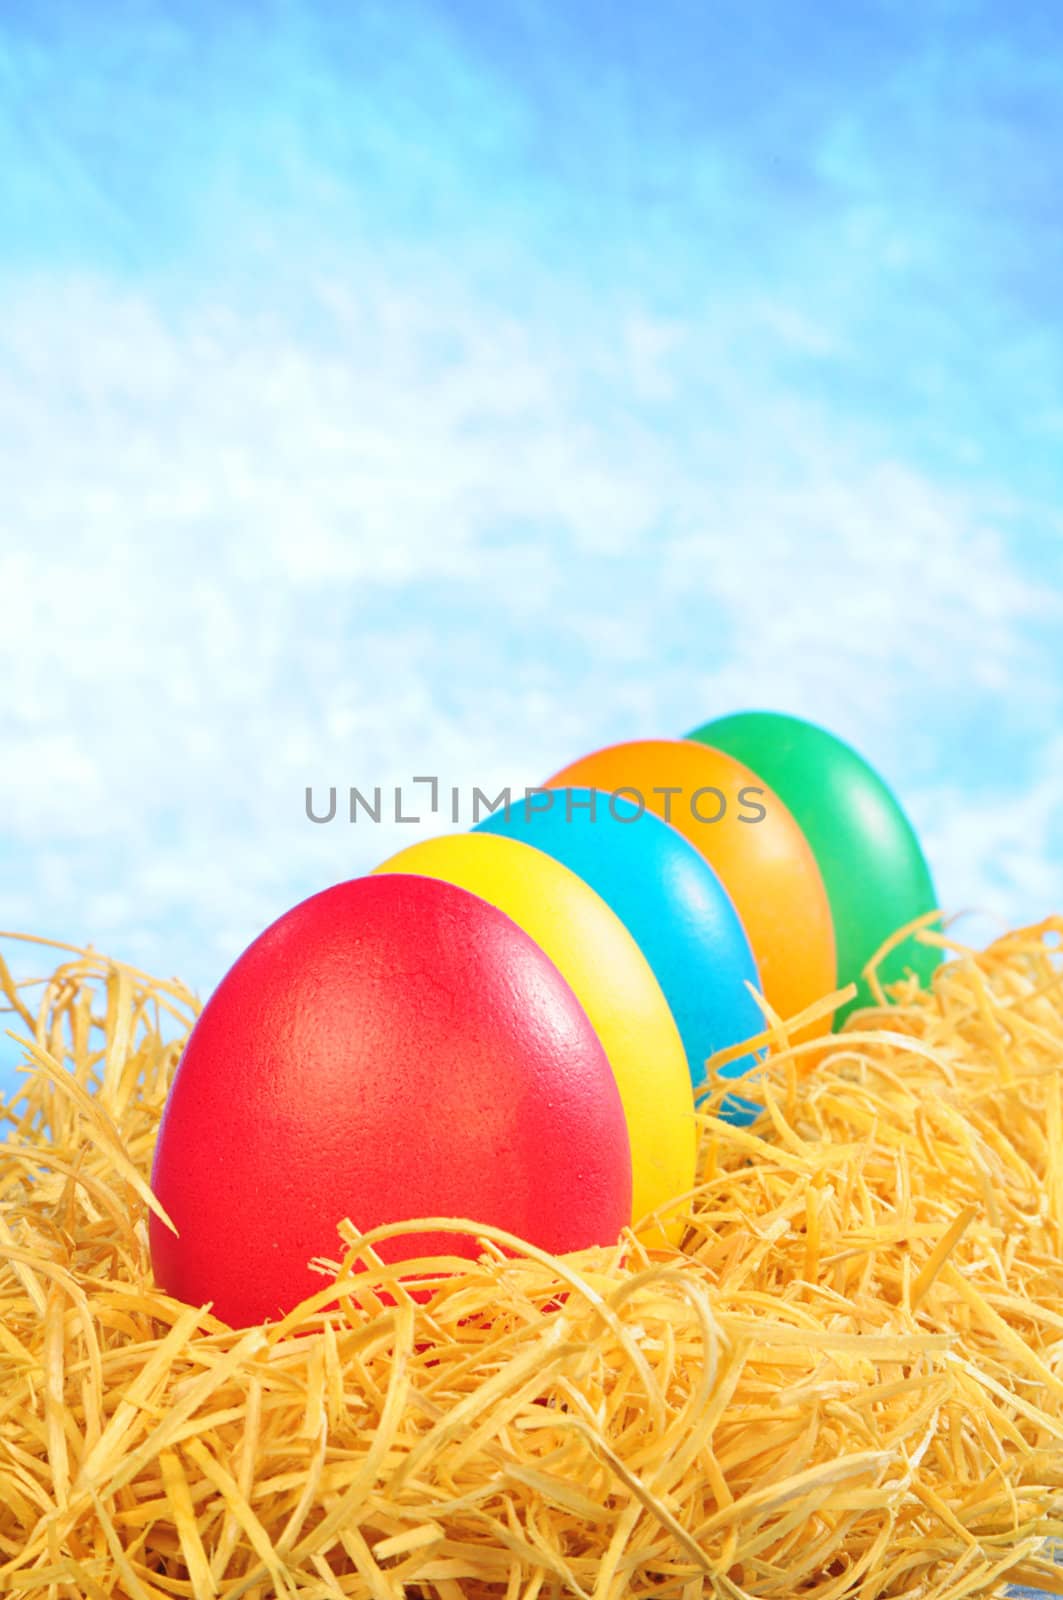 five painted eggs on a straw on a clear sky background